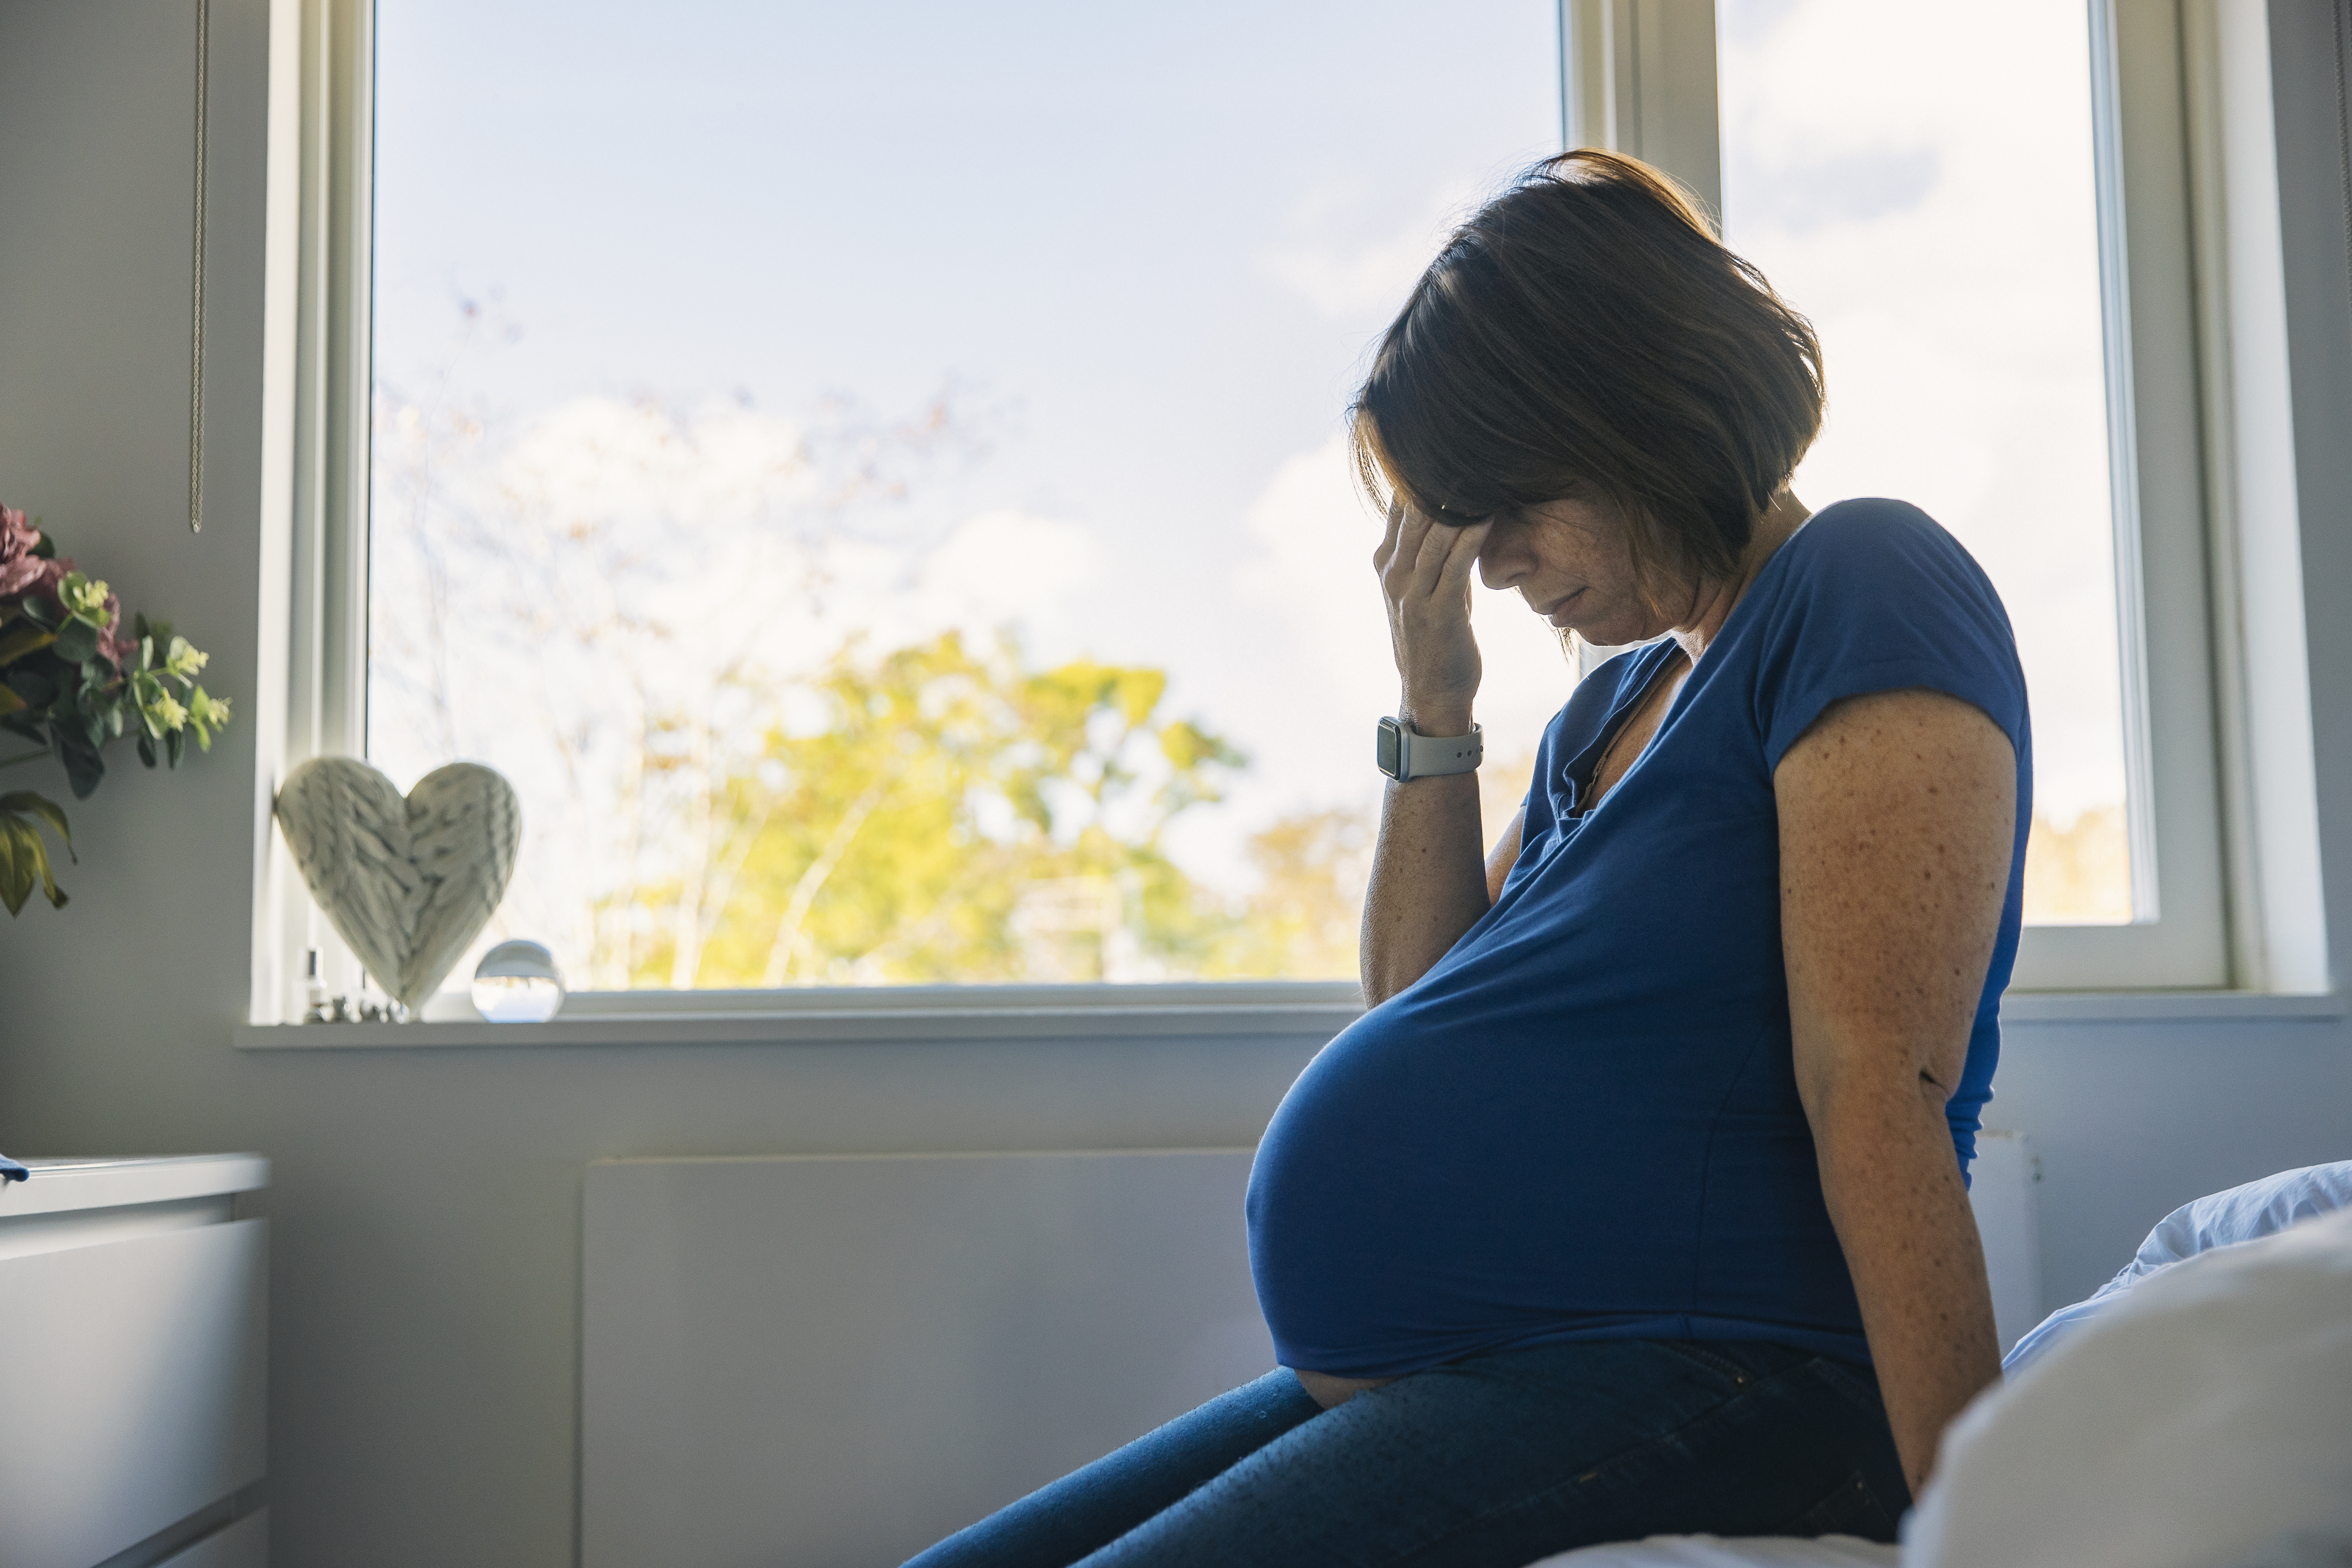 The woman went through her pregnancy alone. | Source: Getty Images